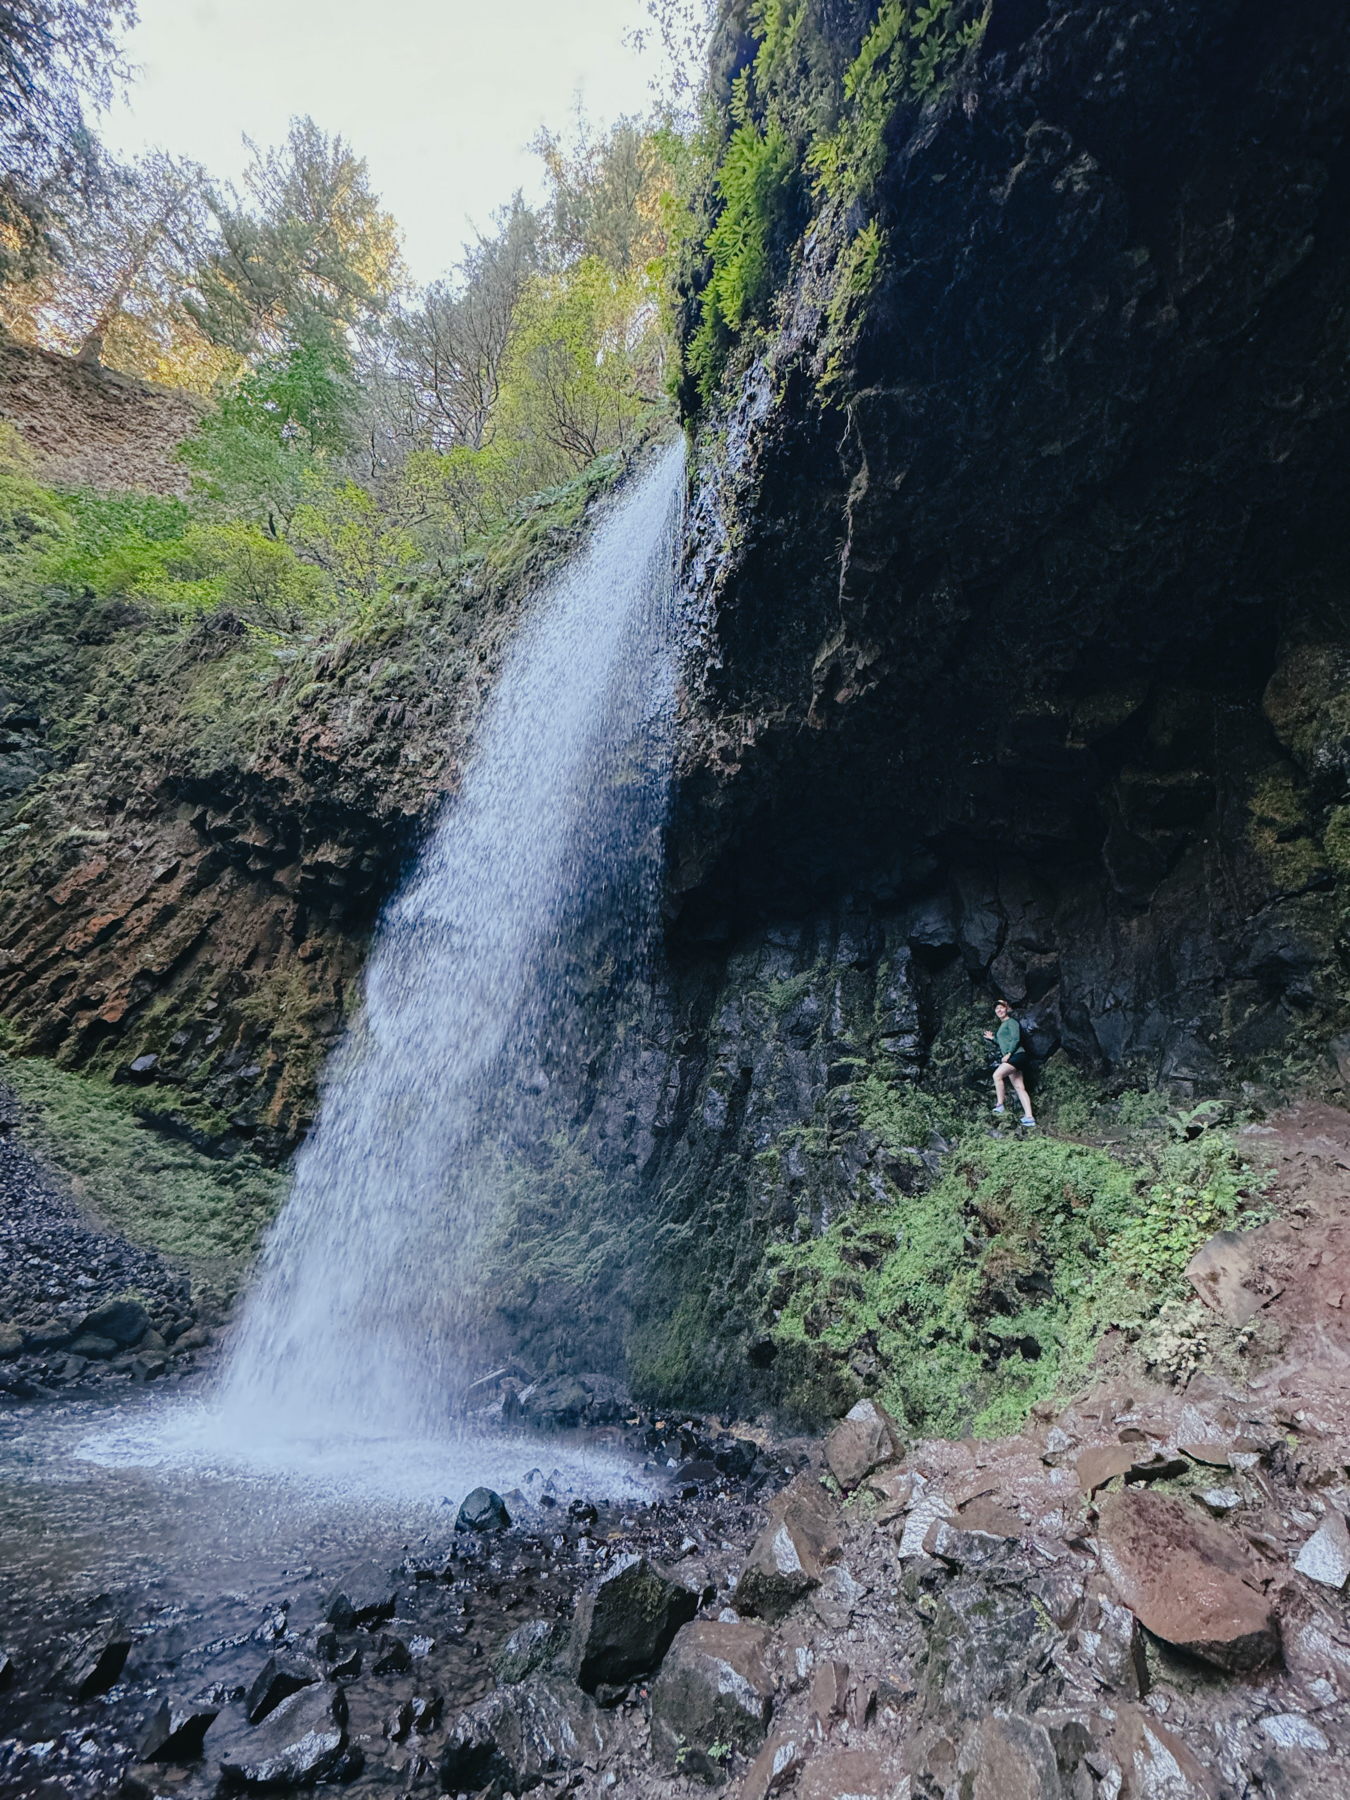 A close view of a waterfall and the water below. A woman stands on the trail to the side of and in between the waterfall and a rock wall.